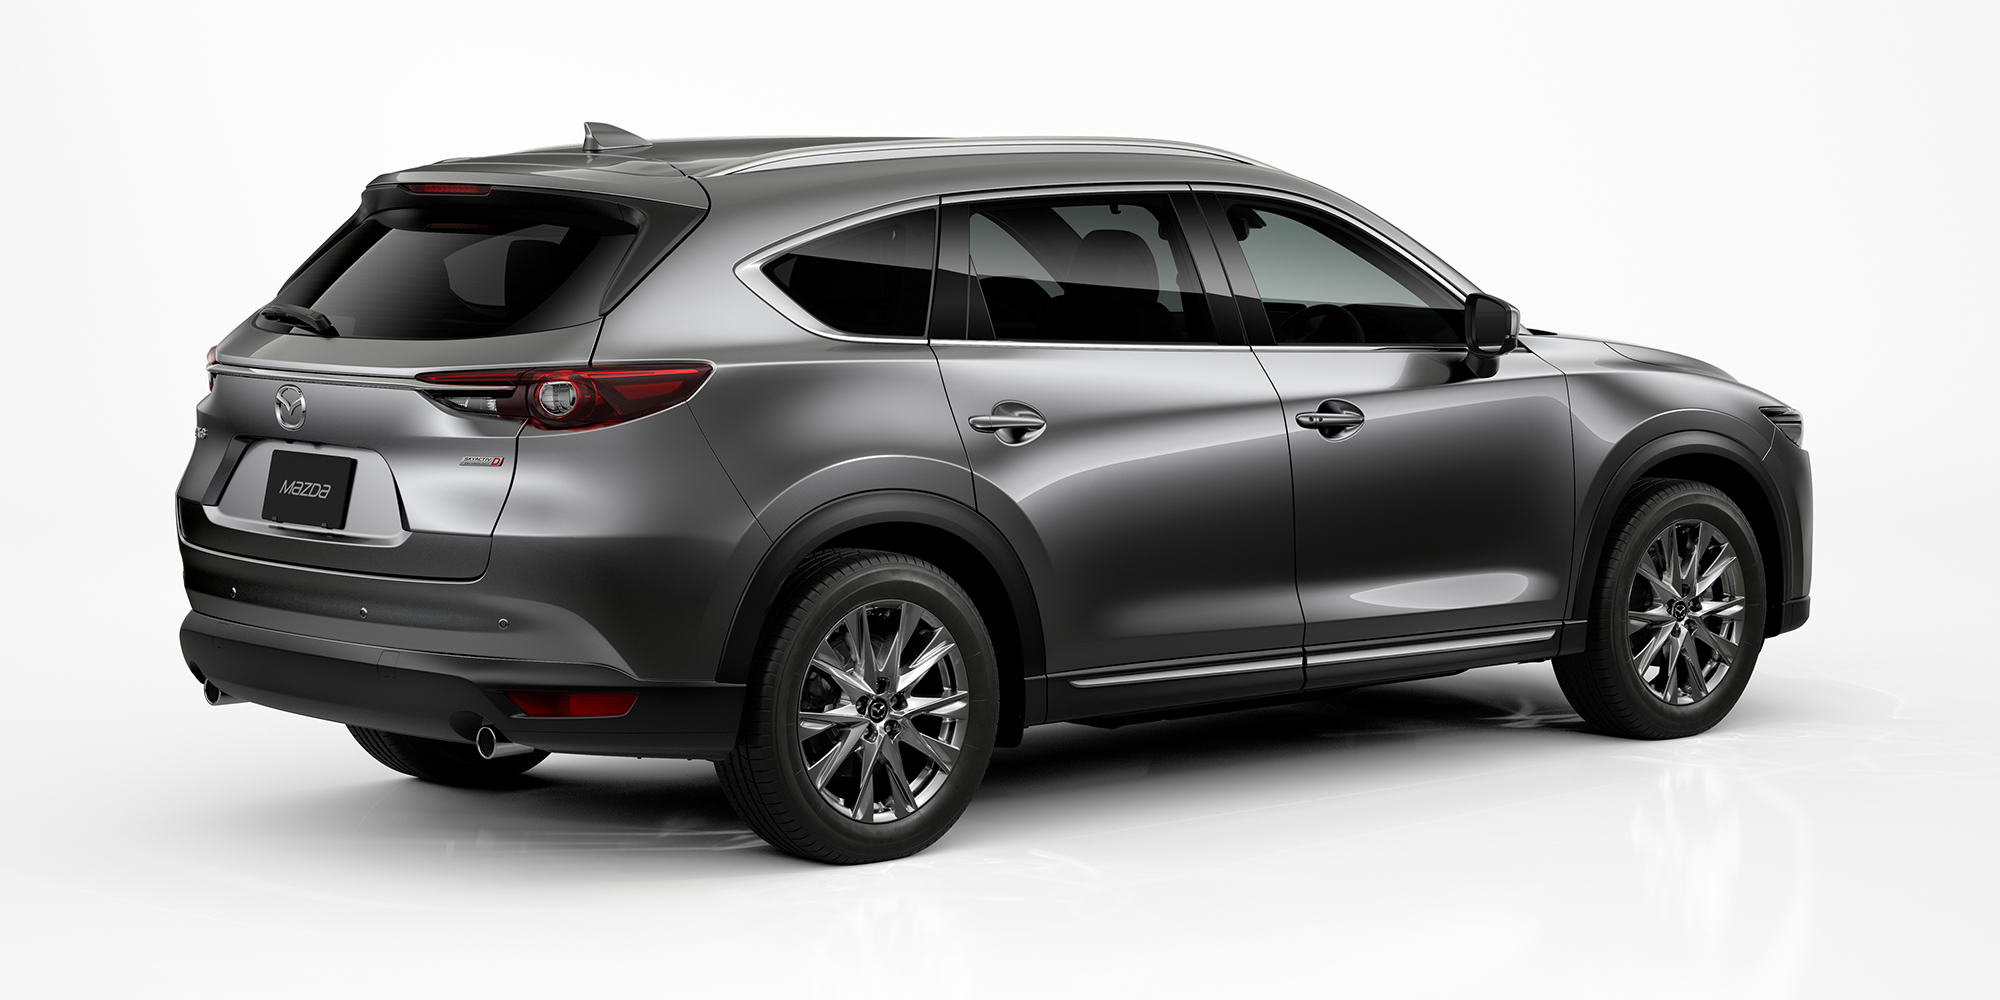 Mazda CX-8 confirmed for Australia, here second-half 2018 - Photos (1 of 6)